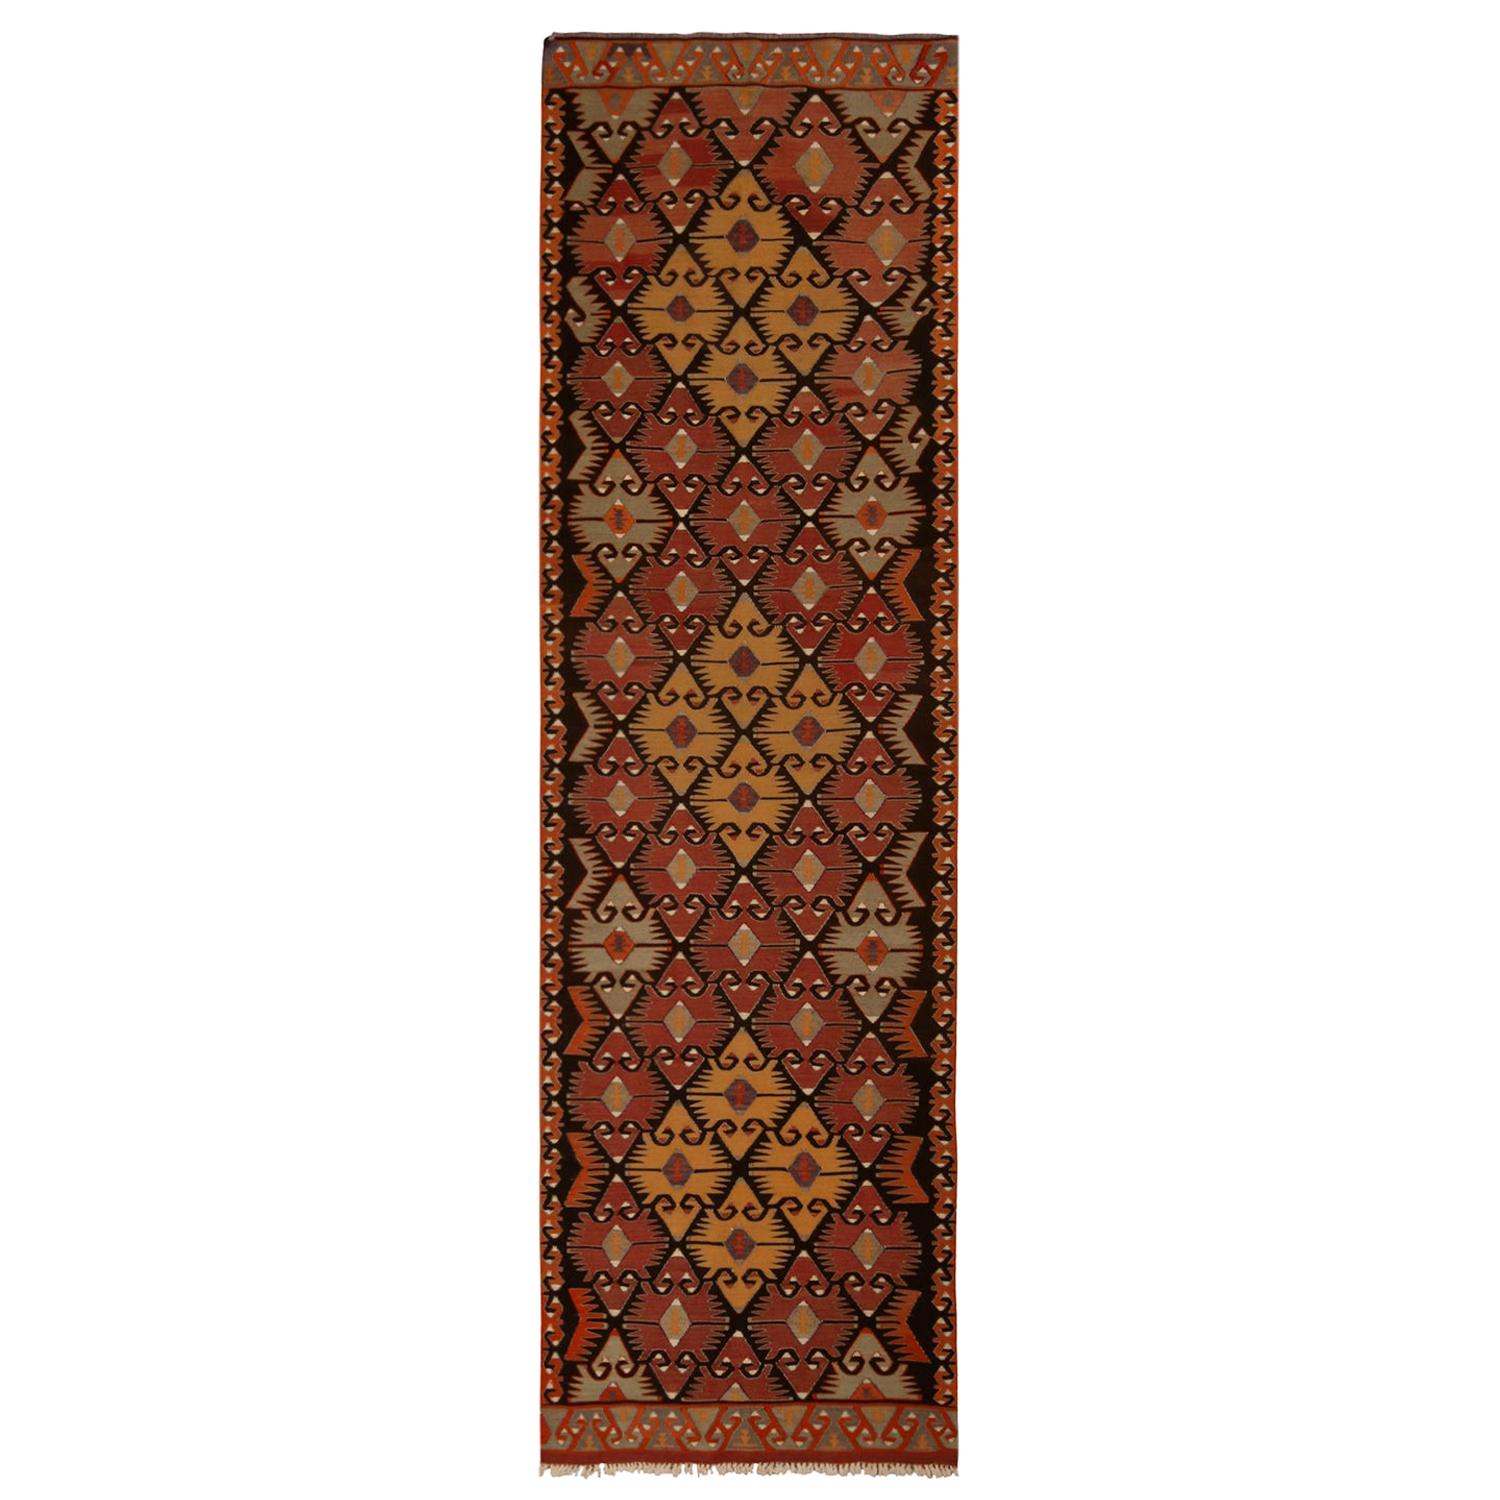 Vintage Burgundy Brown Wool Kilim Rug with Blue and Yellow Accent by Rug & Kilim For Sale